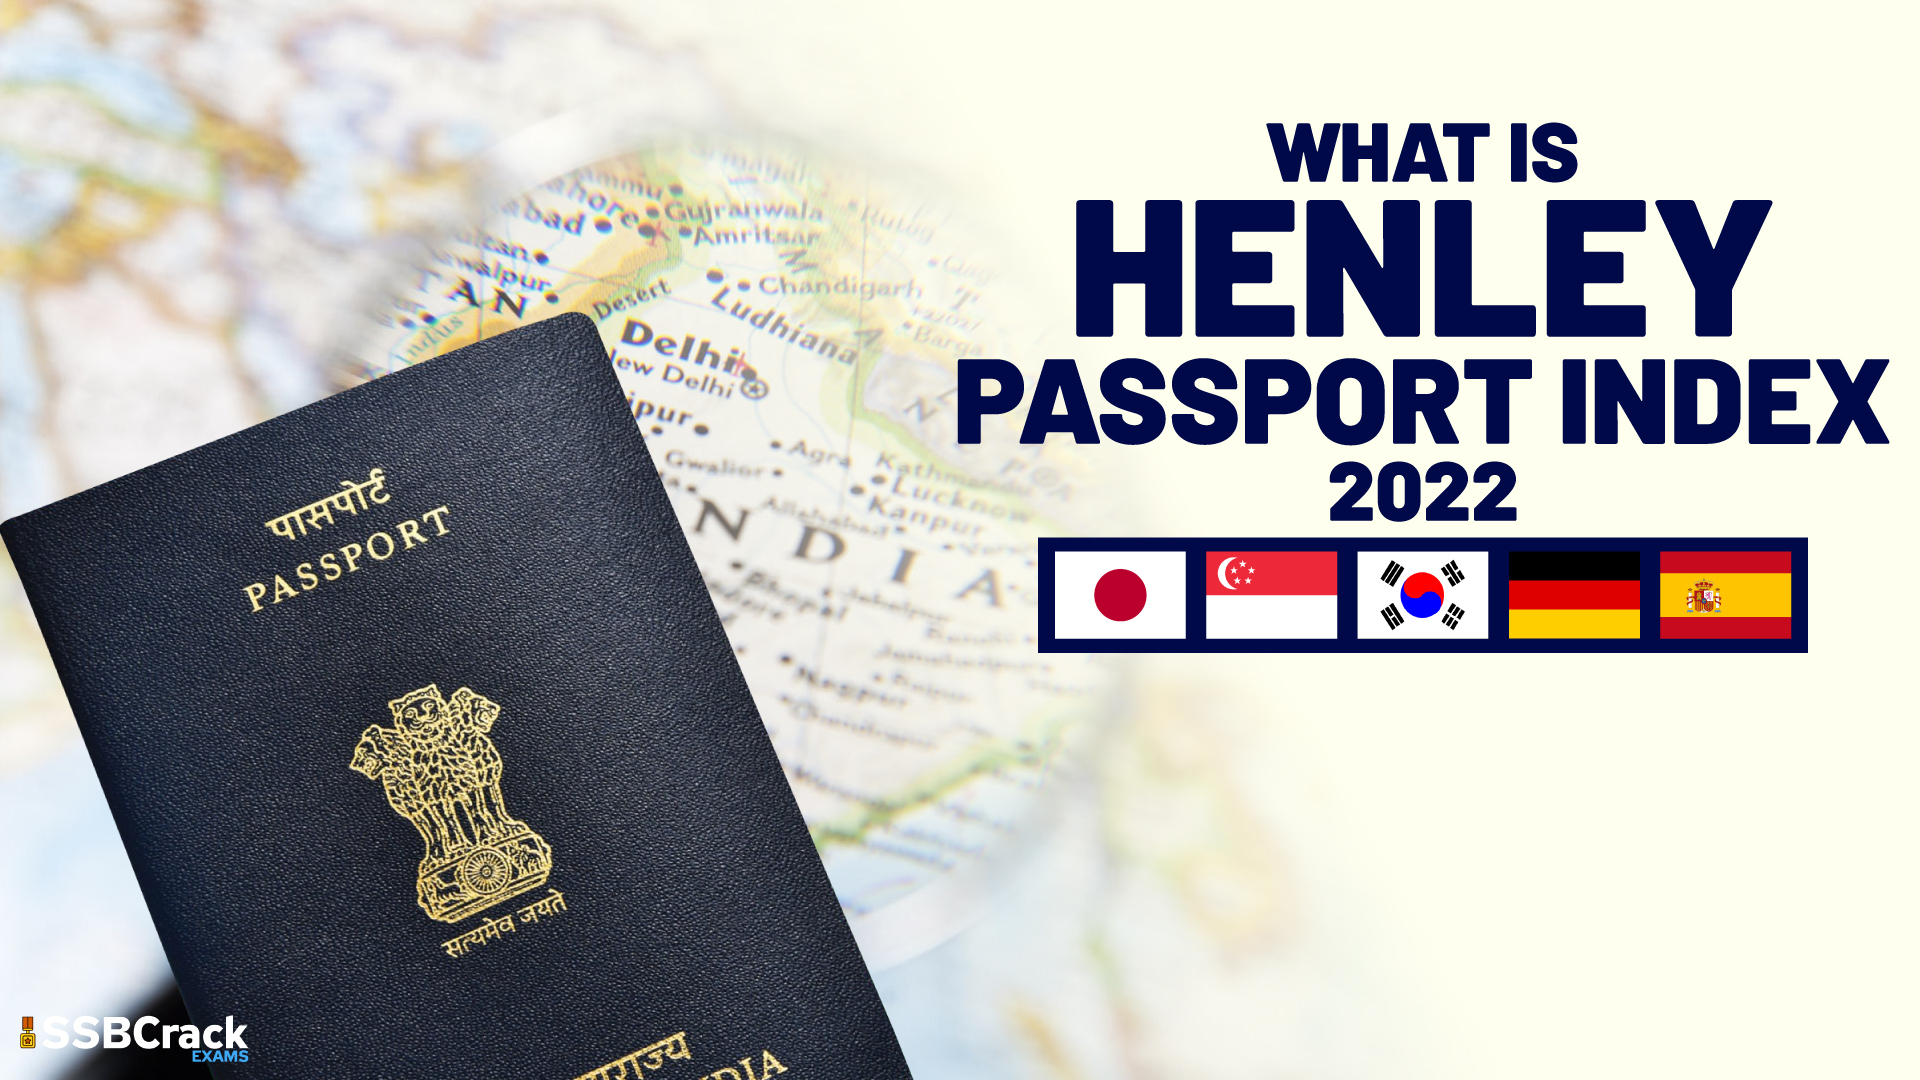 Henley Passport Index 2022 India ranks 87th globally out of 199